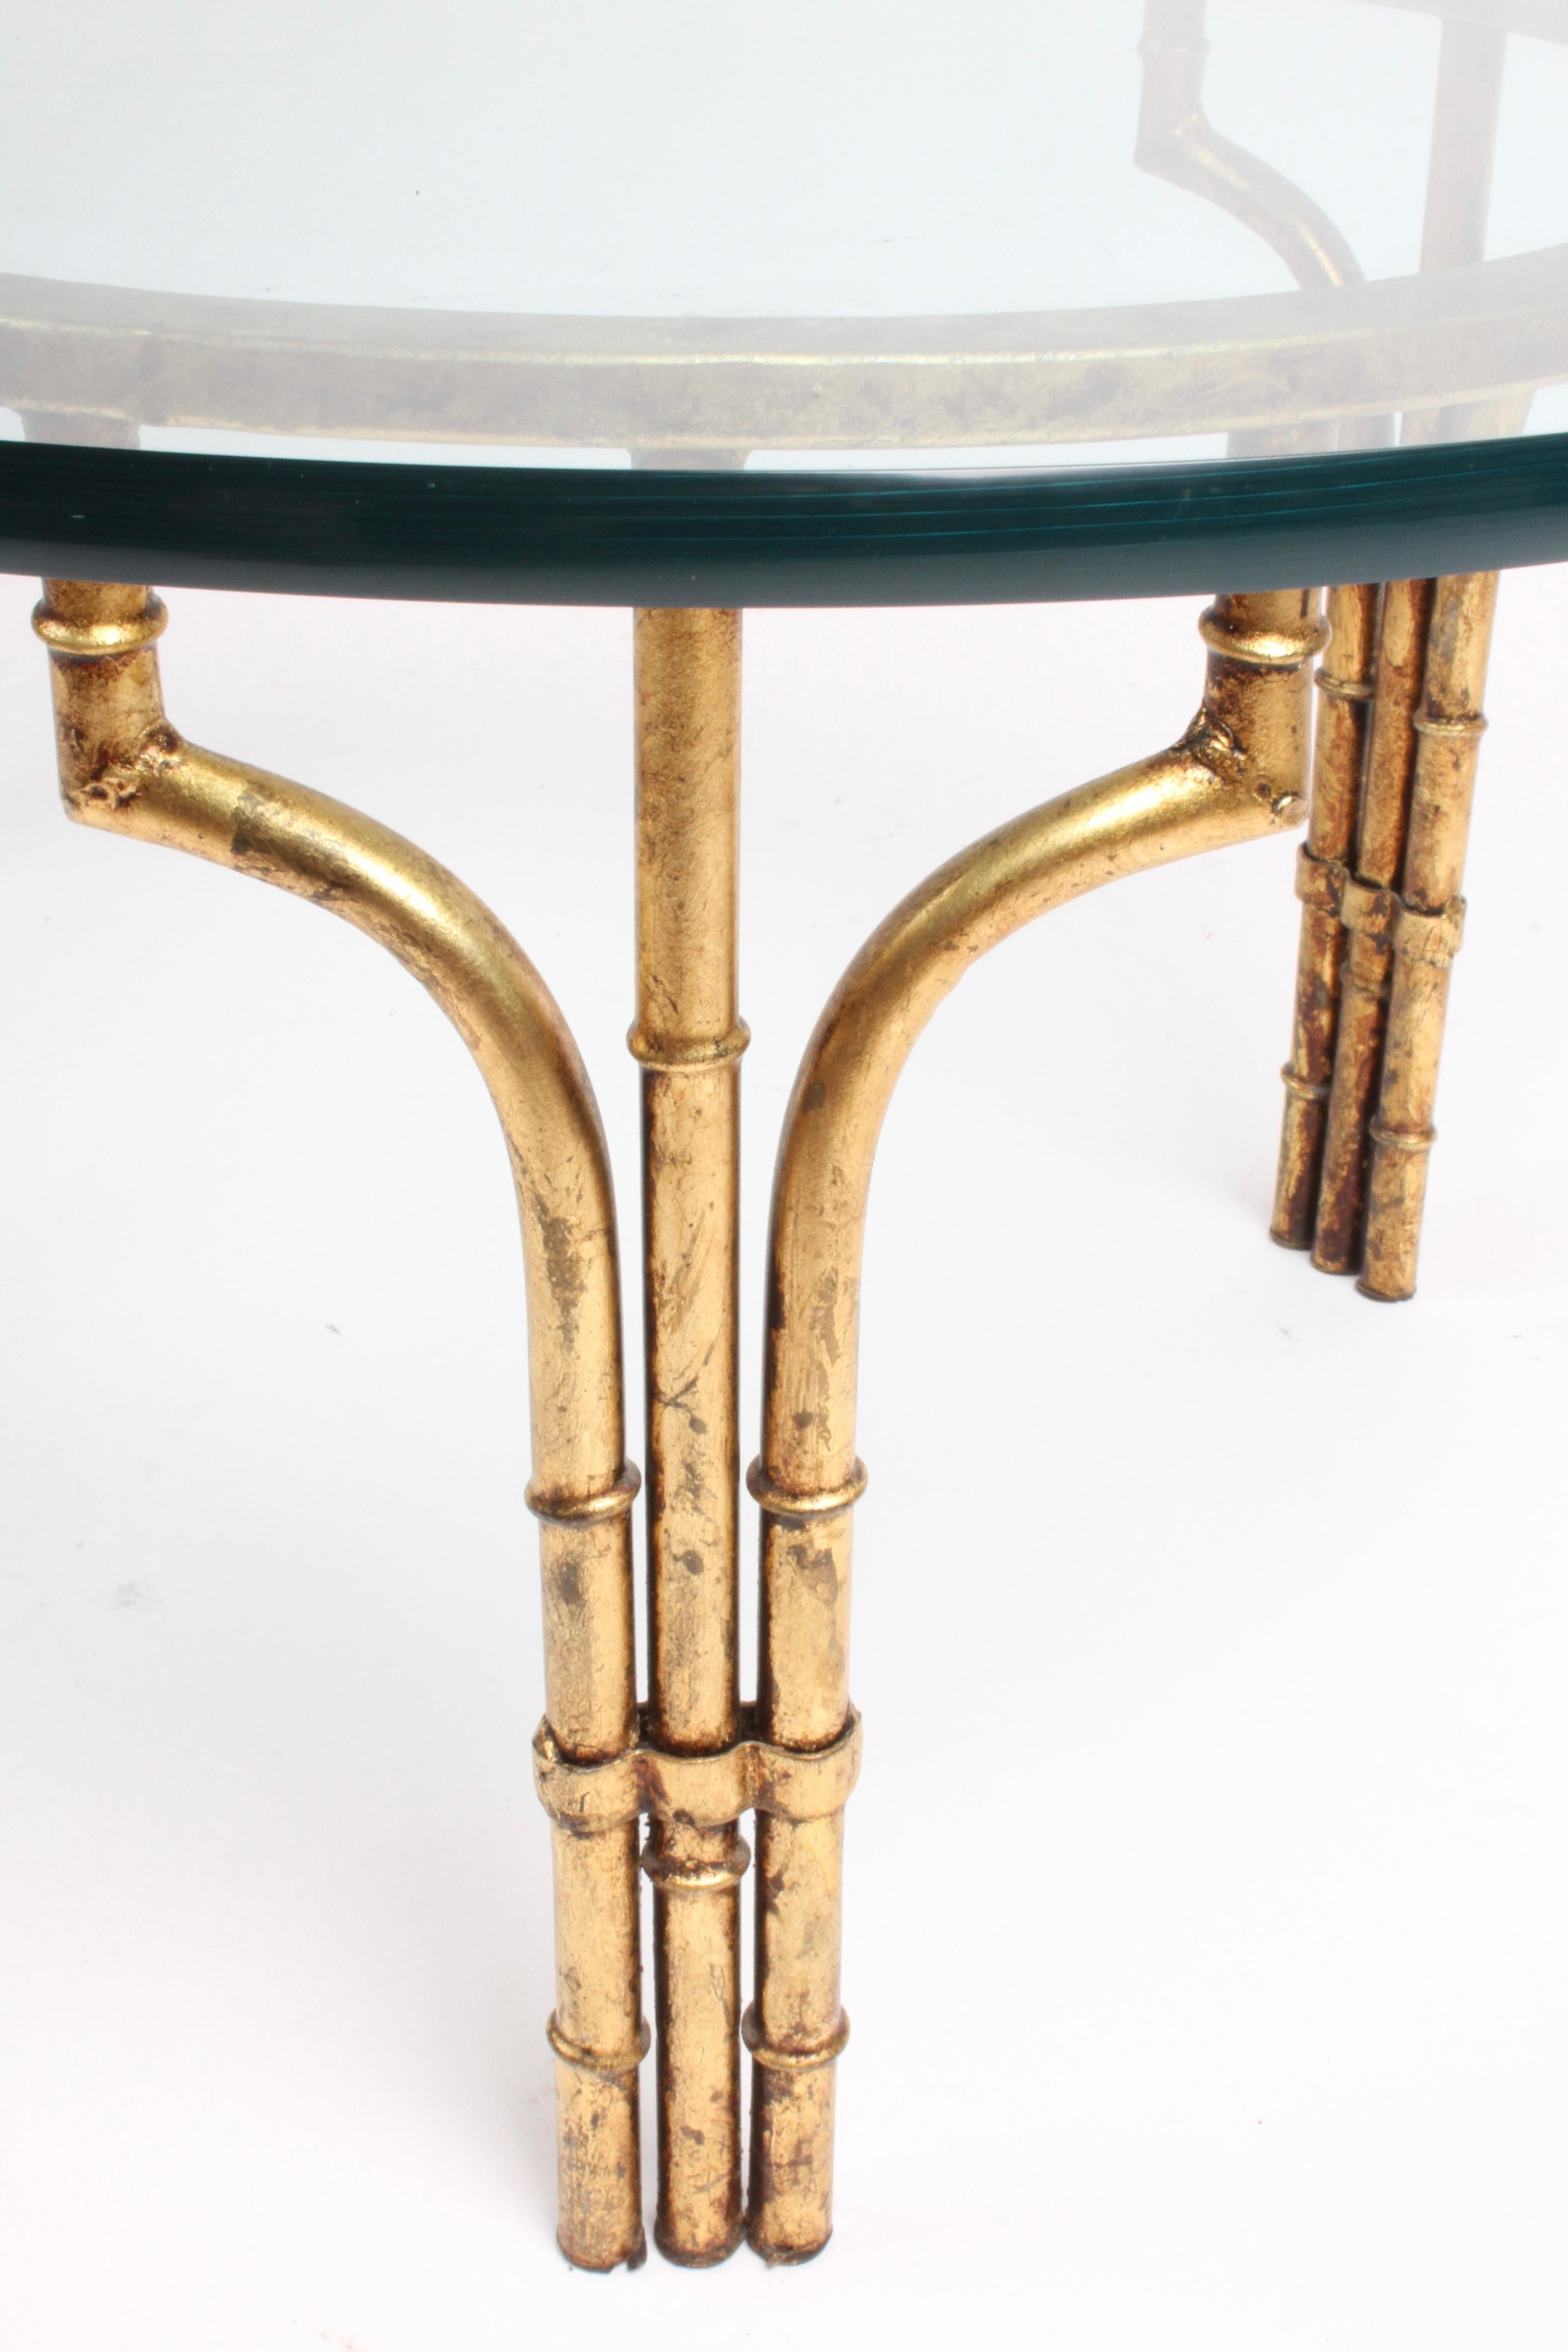 gold bamboo glass coffee table